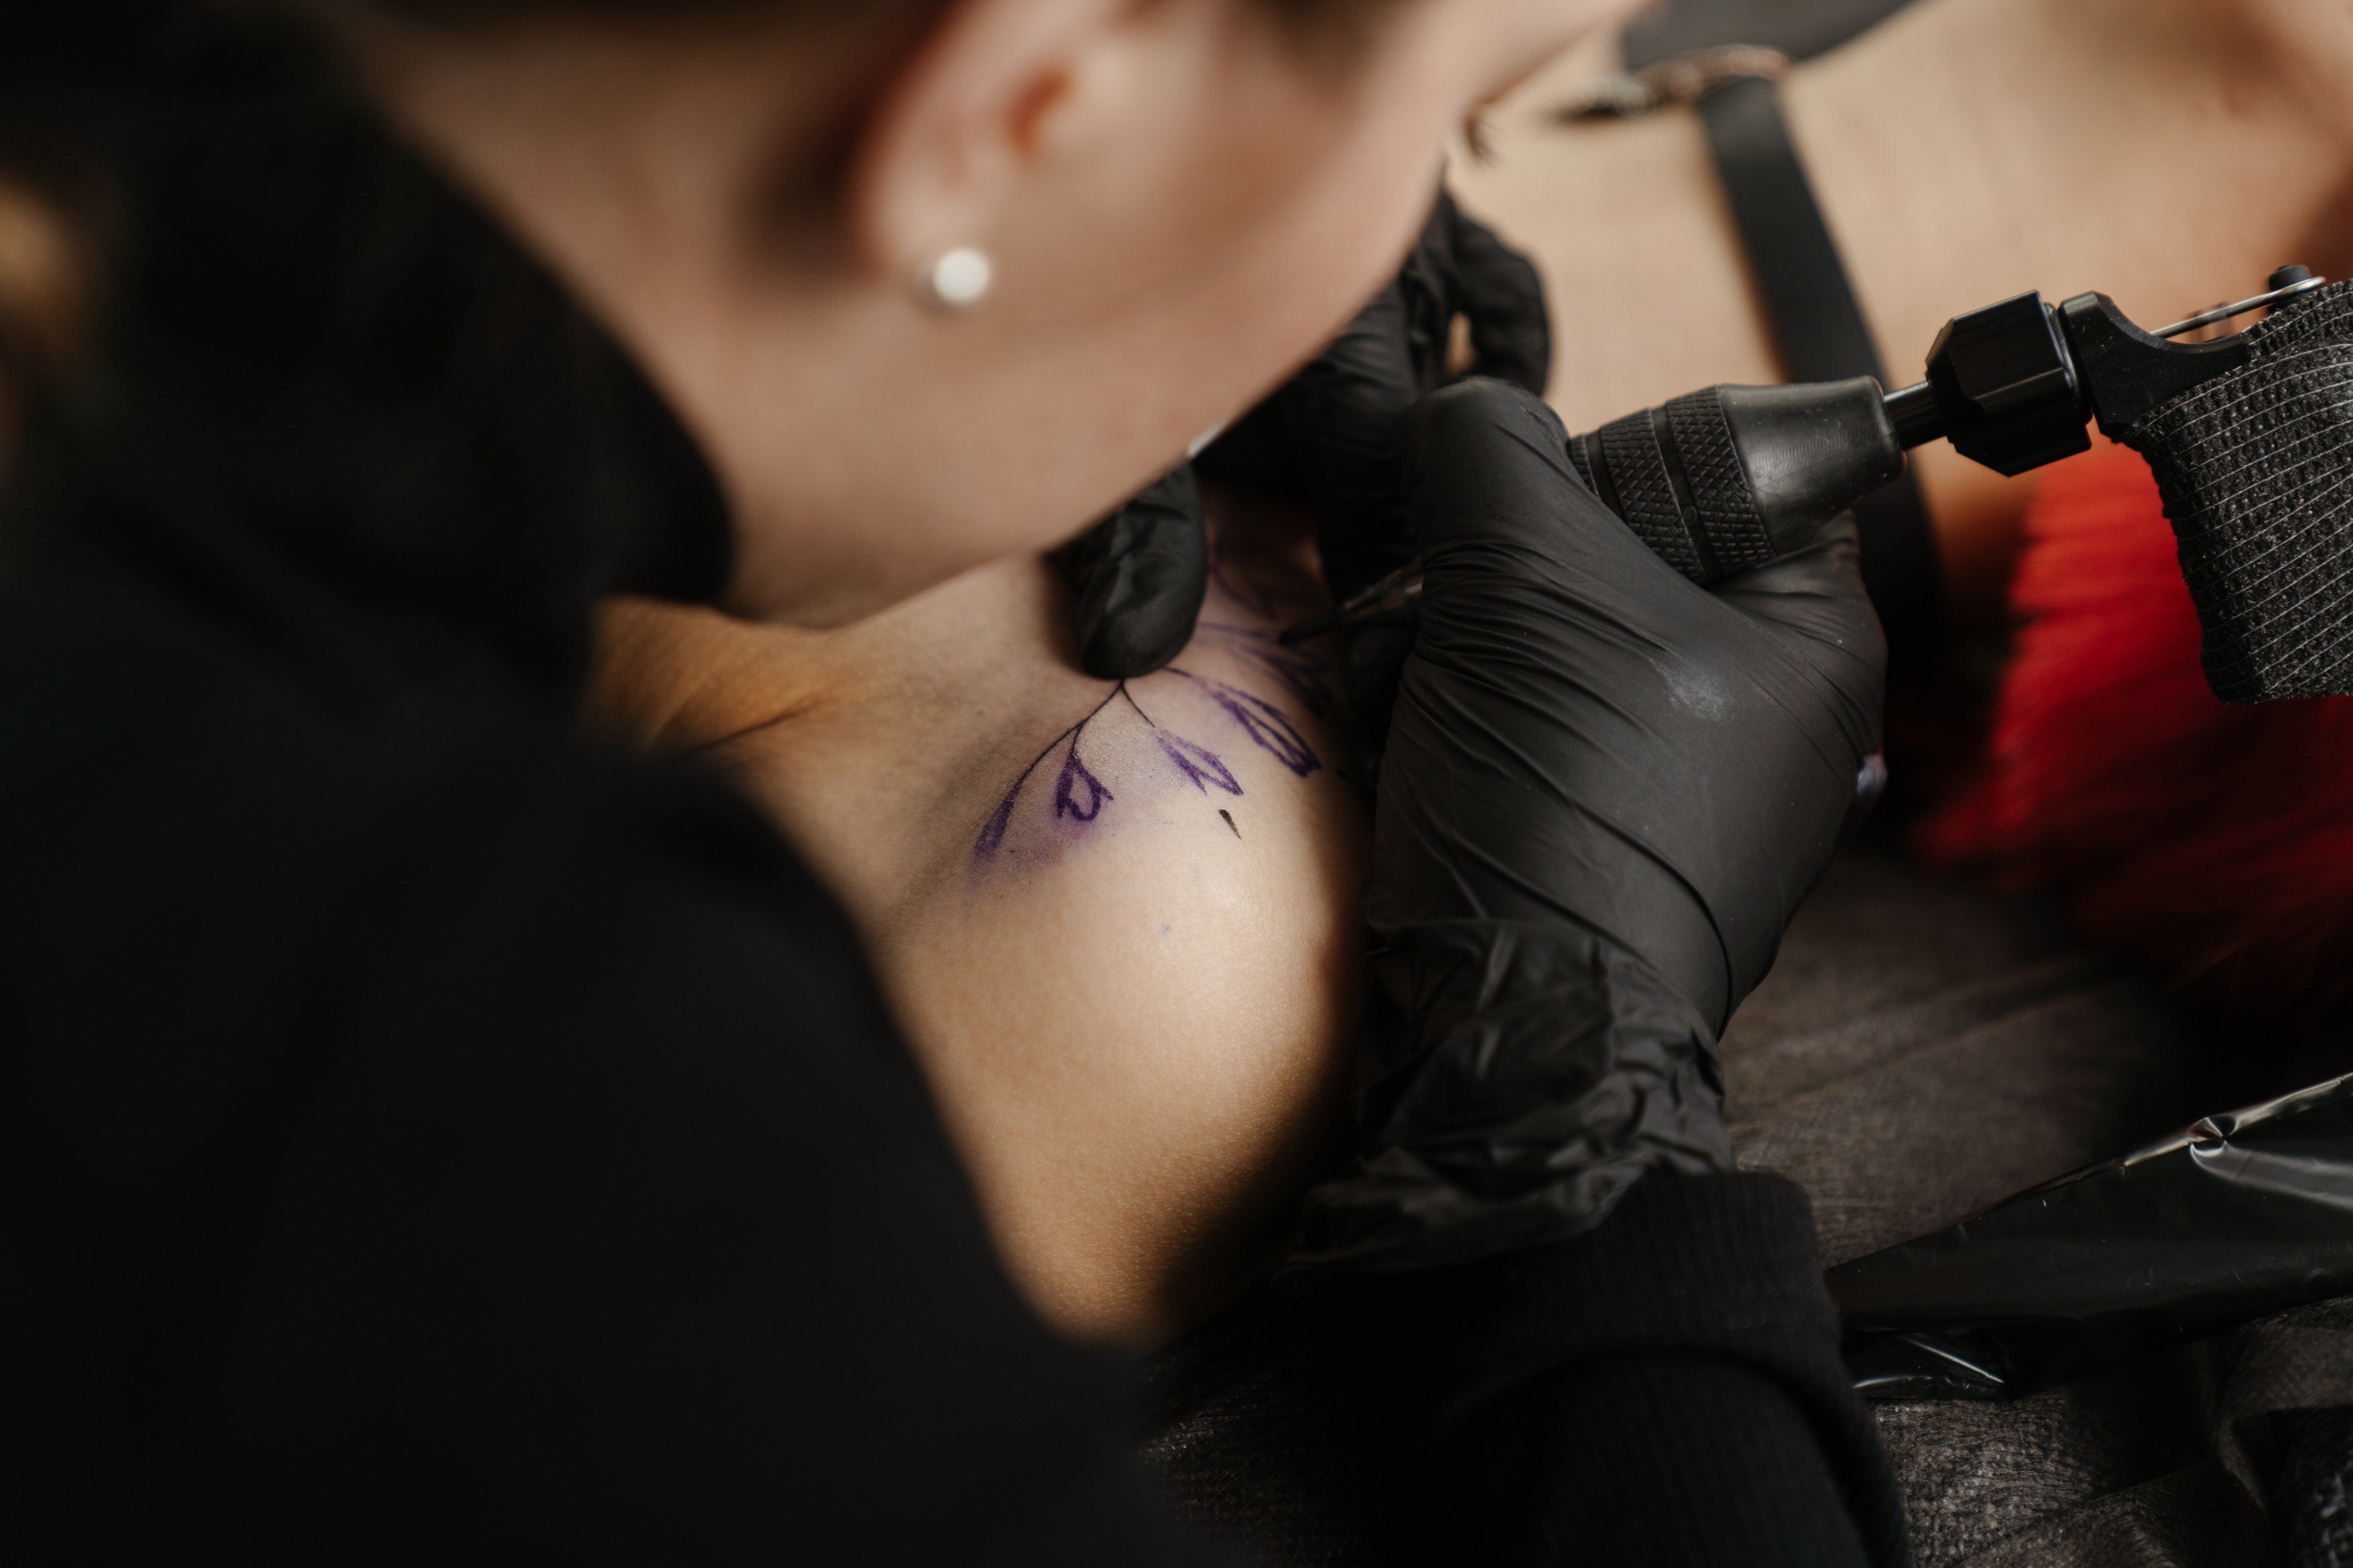 How to Tattoo for Beginners - Tattooing 101